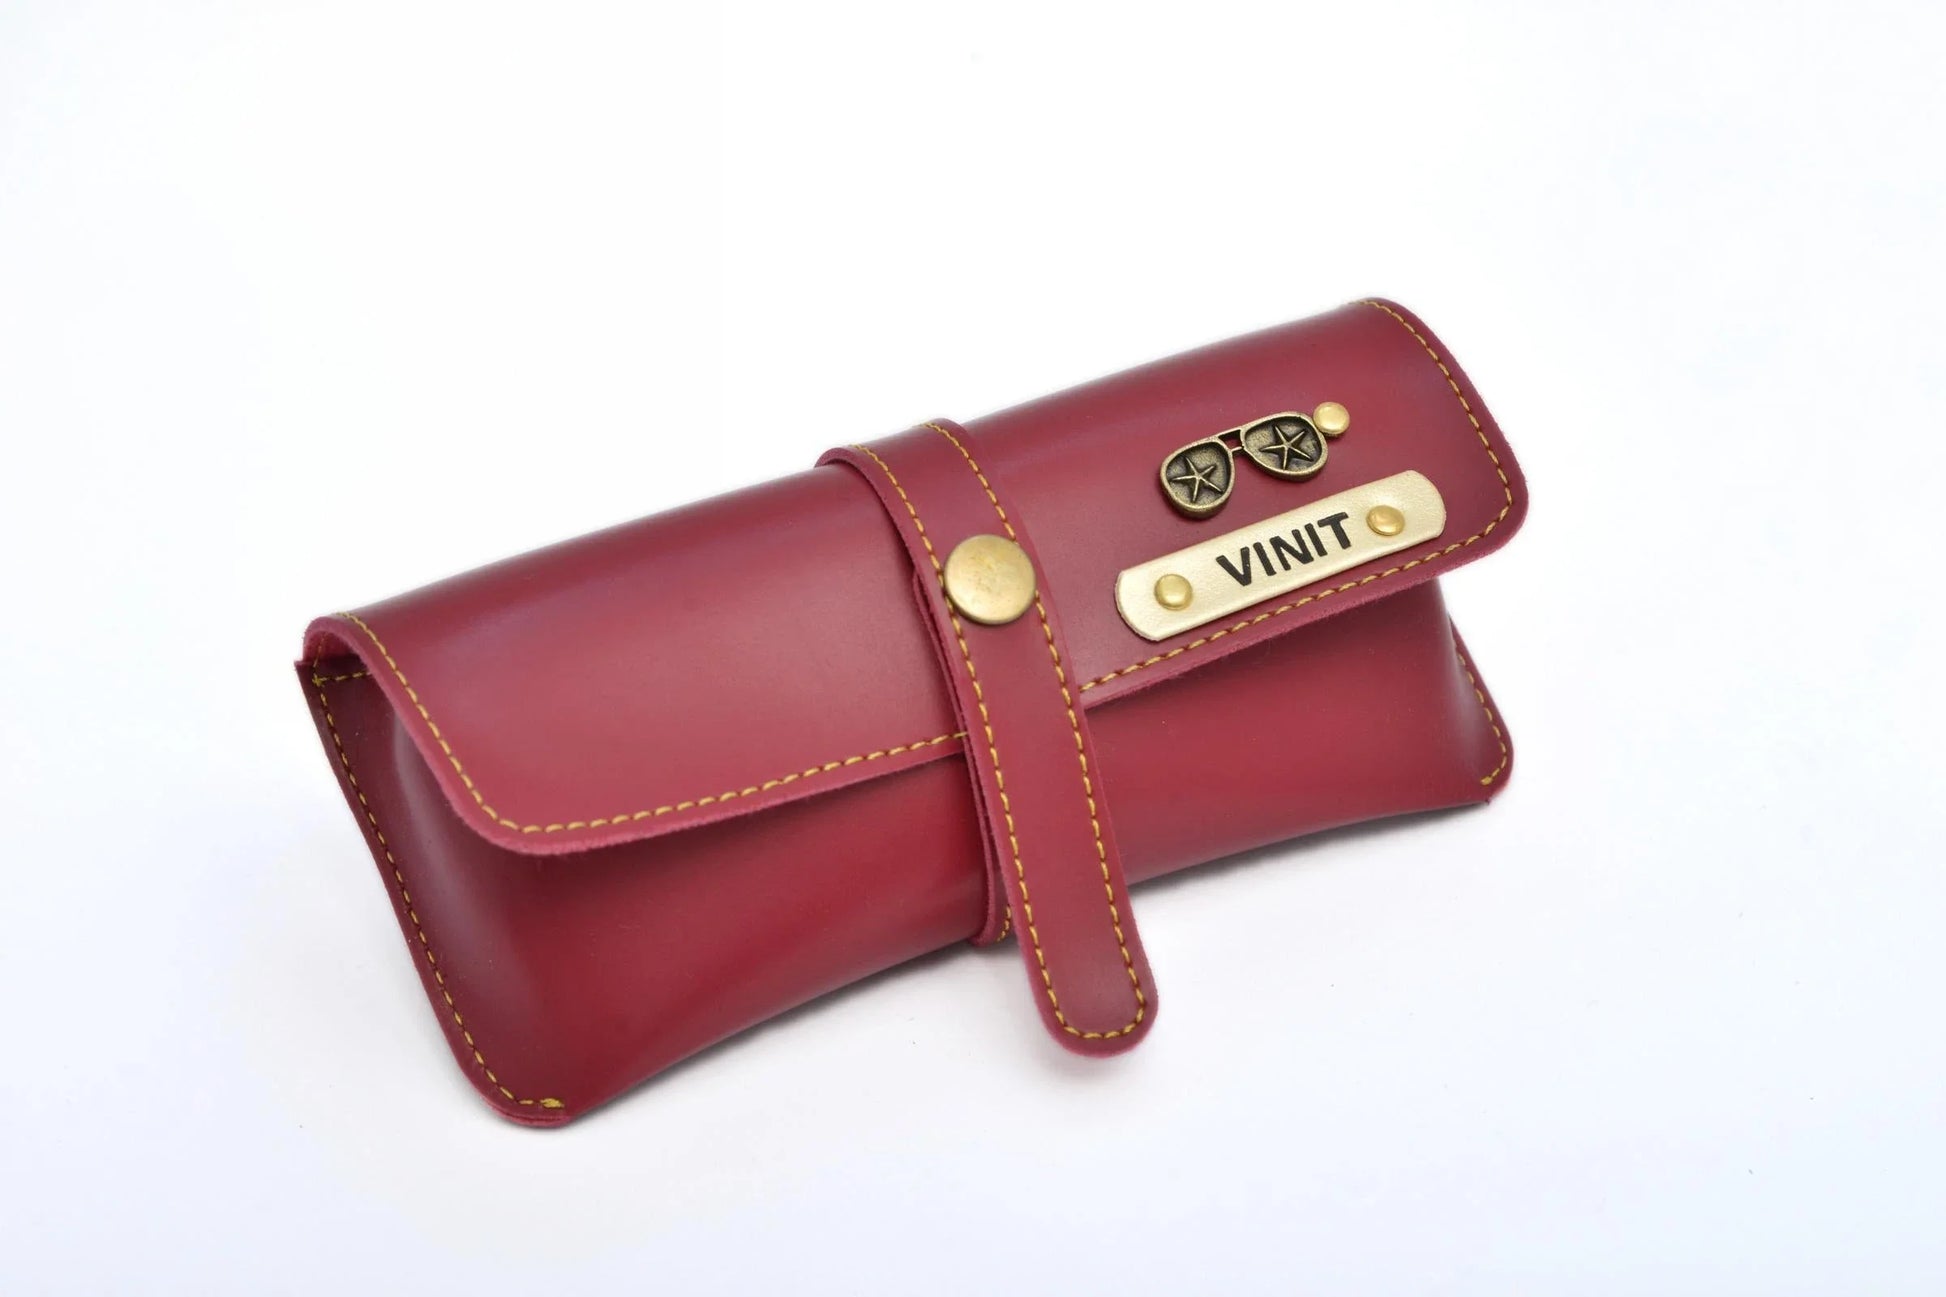 personalized-cb03-wine-customized-best-gift-for-boyfriend-girlfriend.So, protect your eyewear too and make it look modern by getting your very own classy, personalized unisex leather glass case.  Add your name and charm to your favourite coloured eyewear case and live in style!   With a royal leathery finish and a top-notch material quality, these personalized unisex glass cases prove to be sturdy while looking stylish. They protect your eyewear from all sorts of stresses!